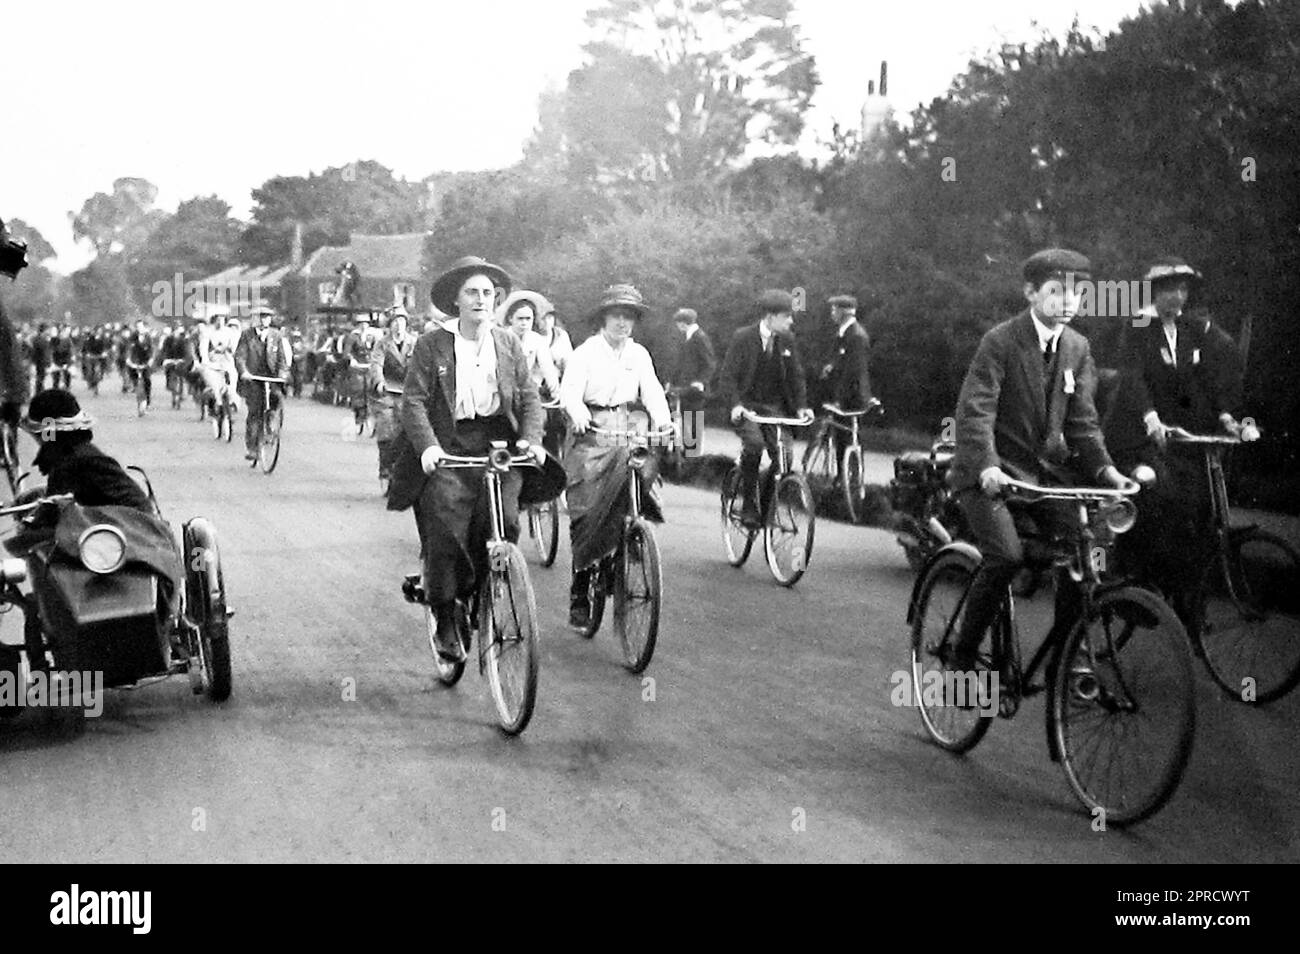 Cycling rally, early 1900s Stock Photo